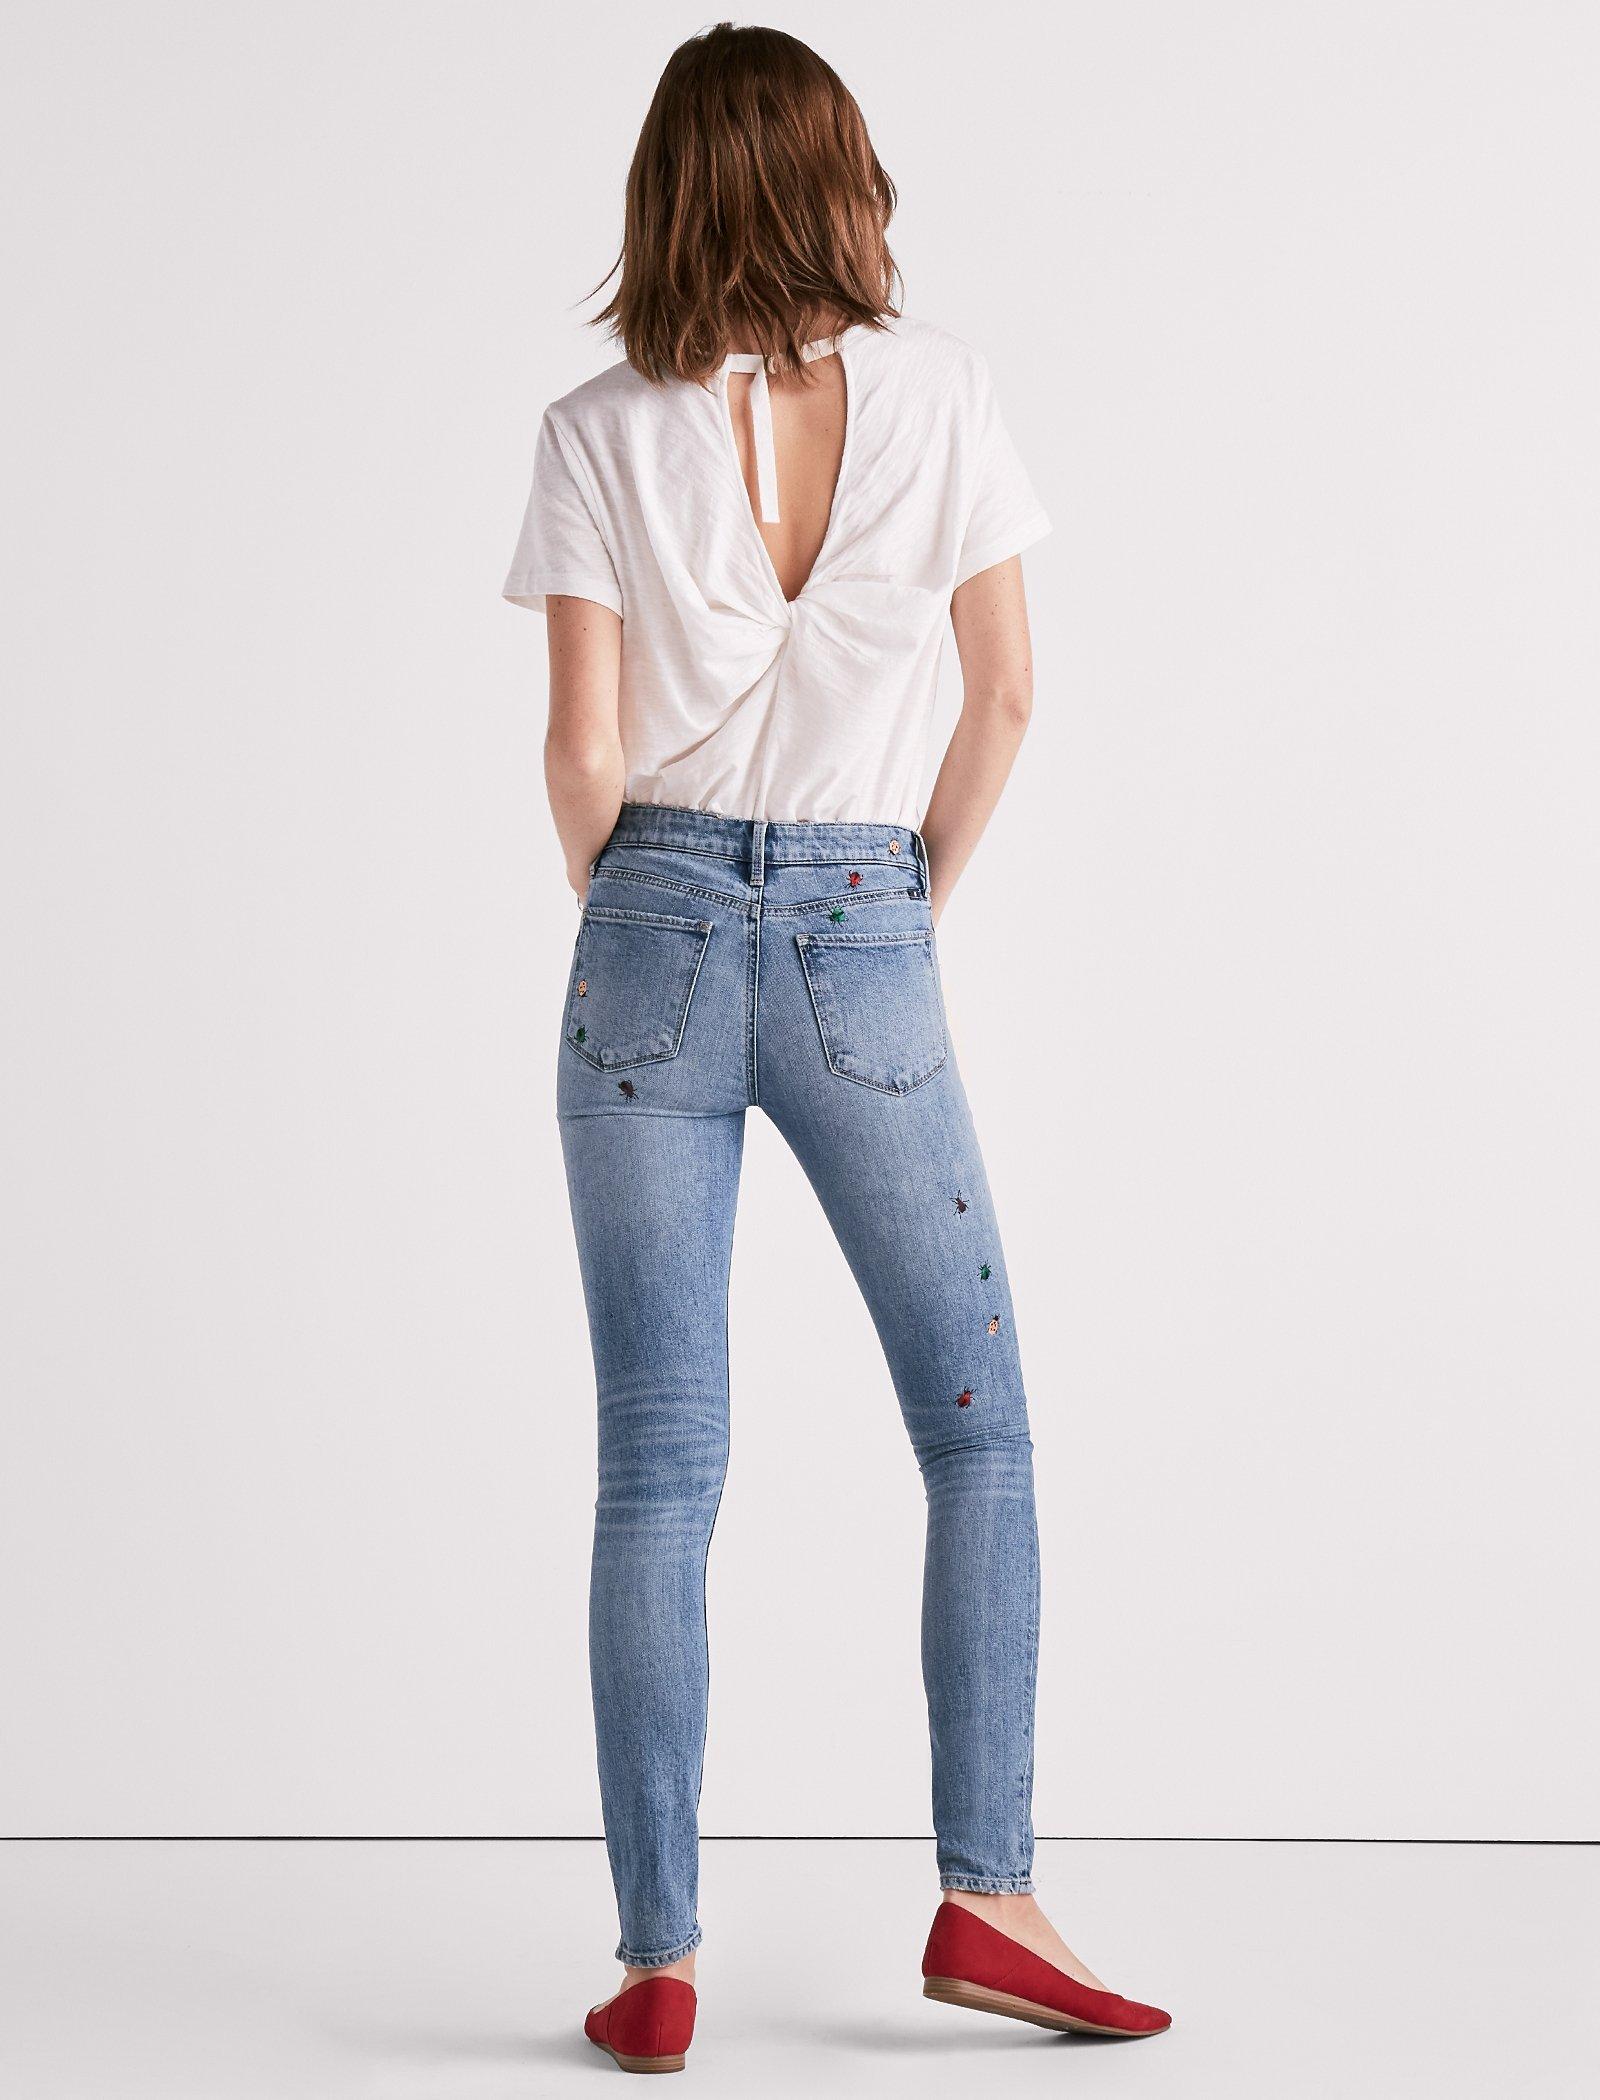 AVA MID RISE SKINNY JEAN WITH DITSY BUG EMBROIDERY | Lucky Brand